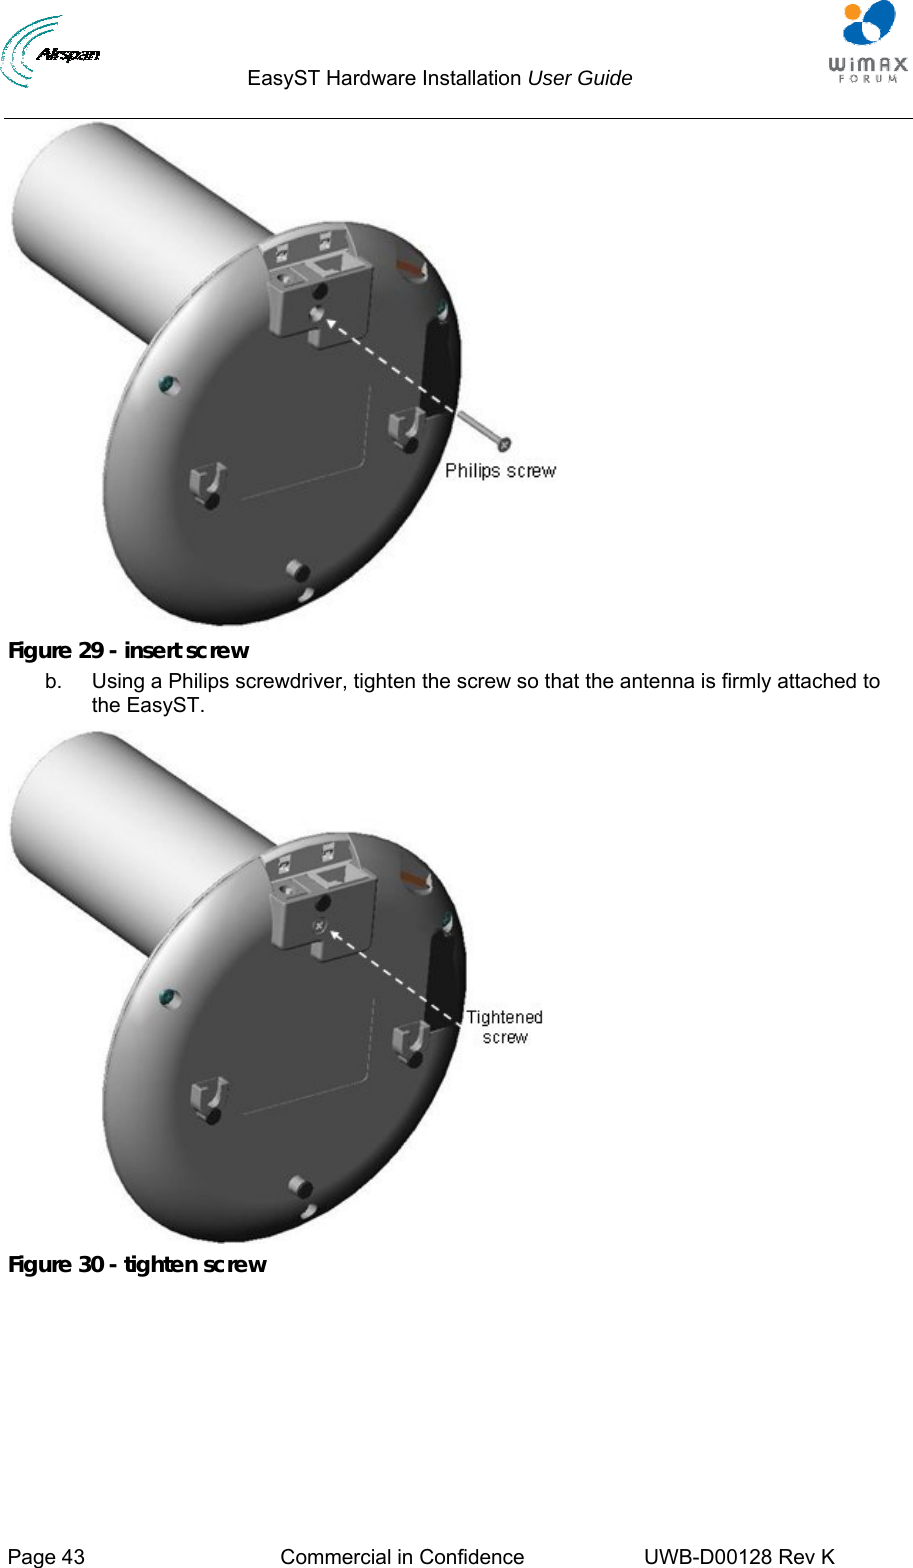                                  EasyST Hardware Installation User Guide     Page 43  Commercial in Confidence  UWB-D00128 Rev K    Figure 29 - insert screw b.  Using a Philips screwdriver, tighten the screw so that the antenna is firmly attached to the EasyST.  Figure 30 - tighten screw 